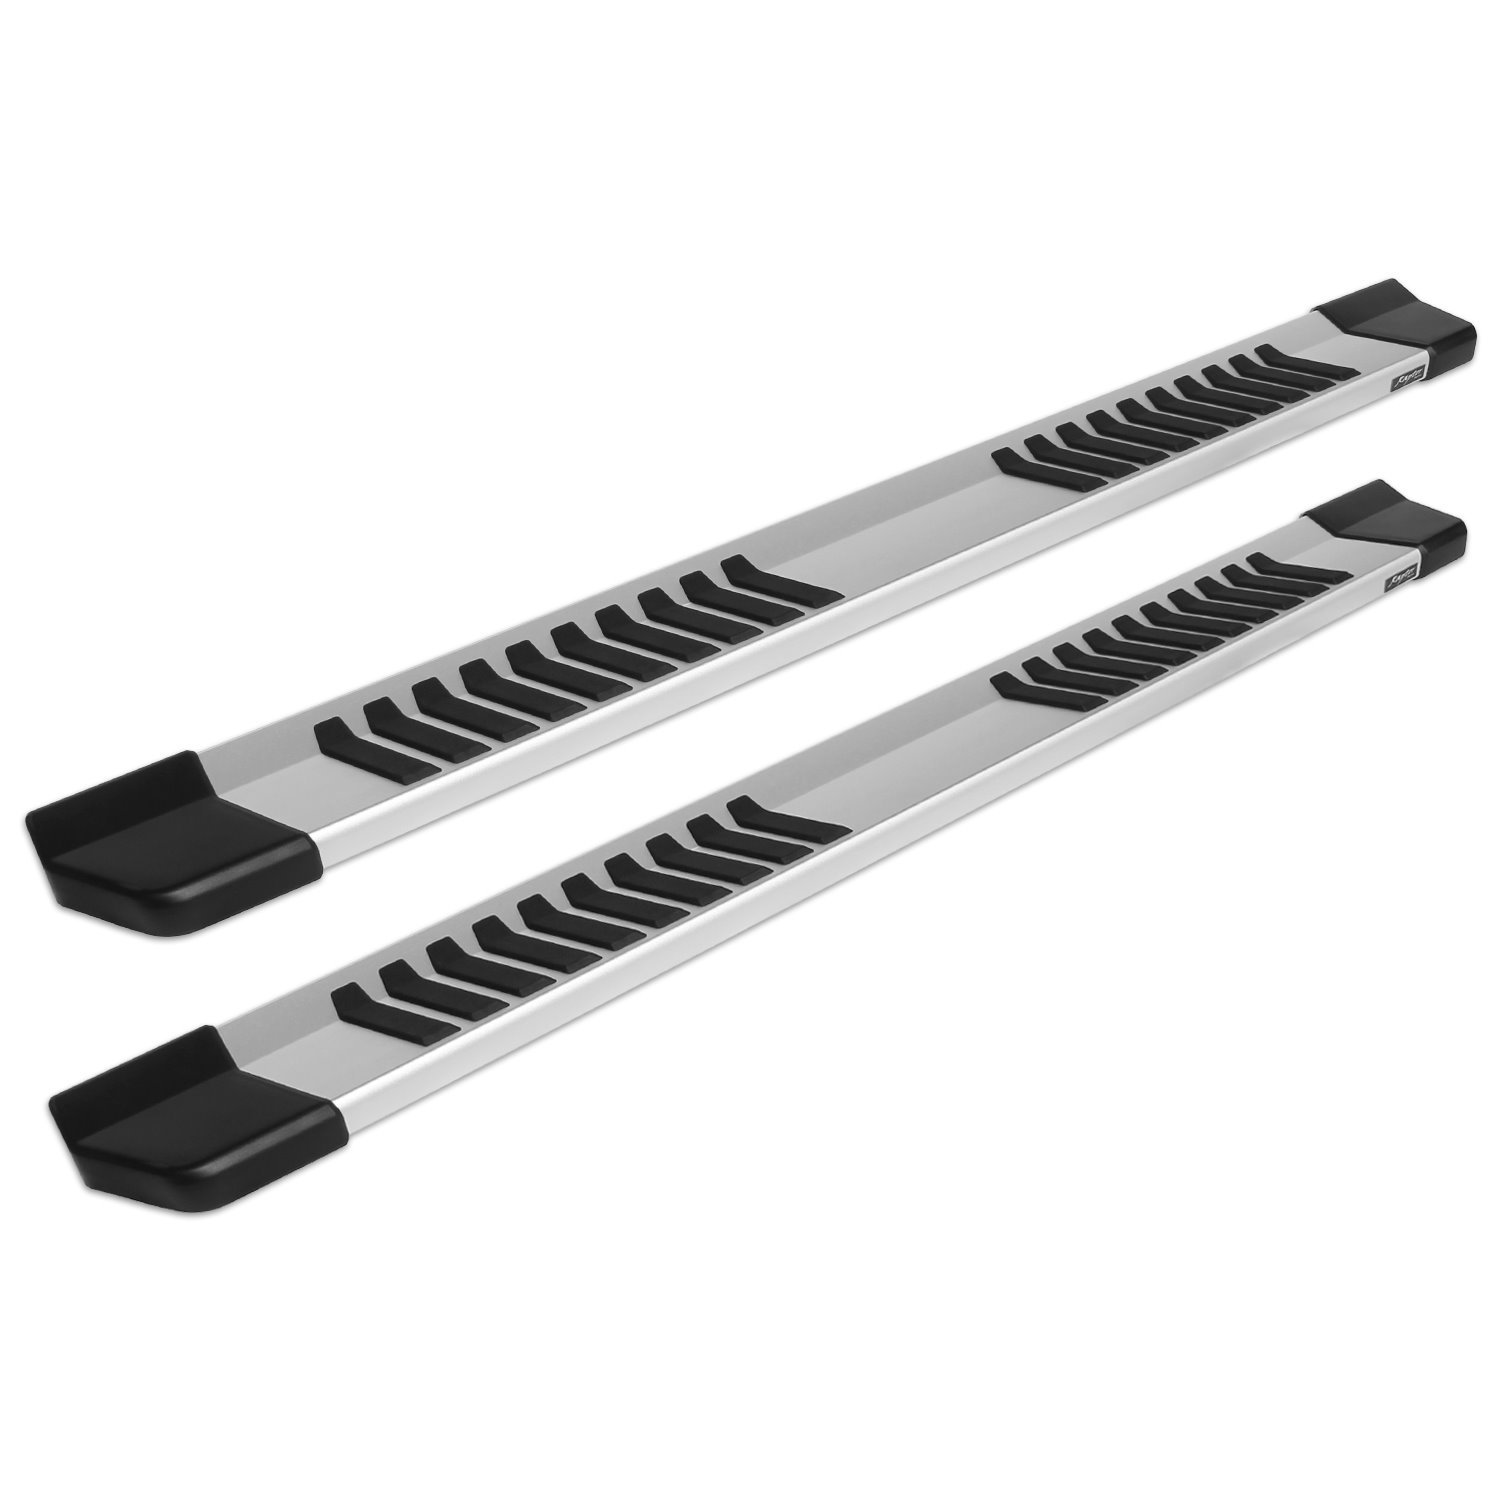 1702-0501 6 in OEM Style Slide Track Running Boards, Brushed Aluminum, Fits Select Dodge Ram 1500 New Body Style